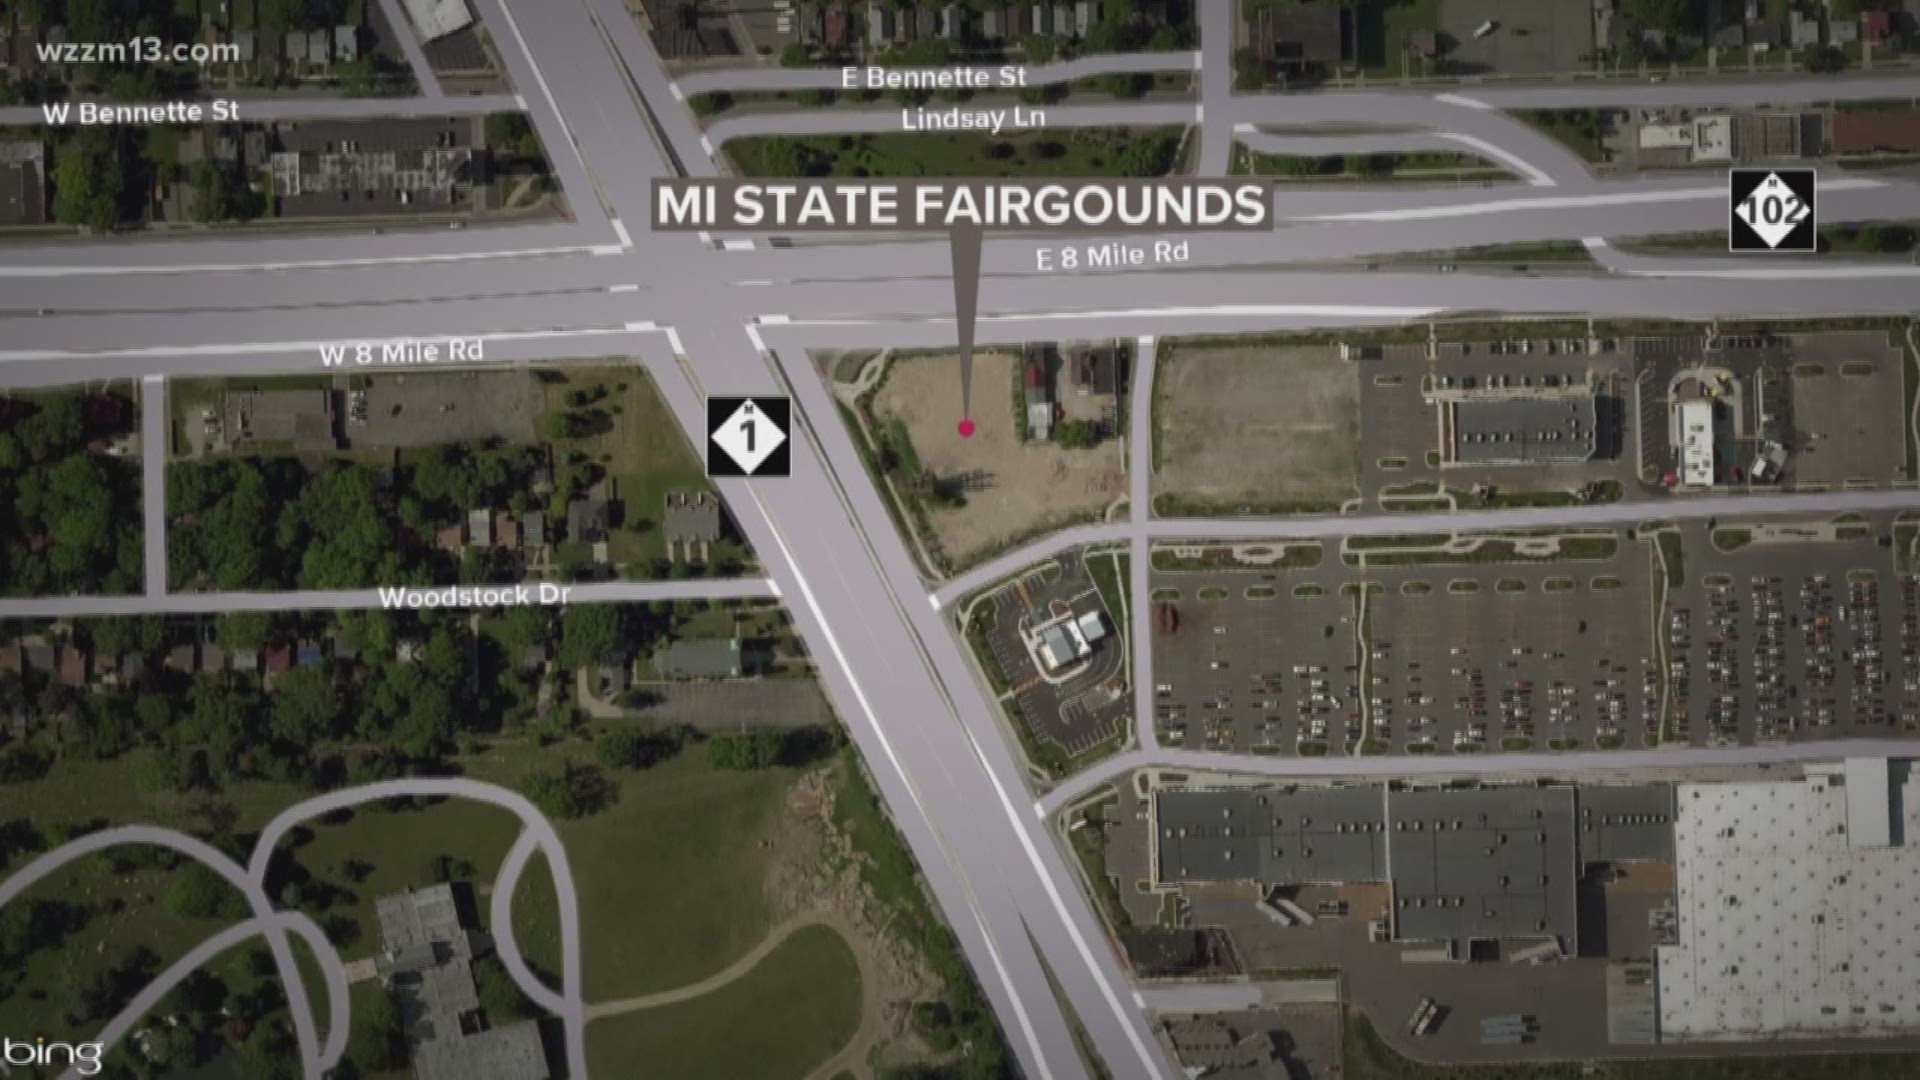 Magic Johnson buys part of old Michigan State fairgrounds